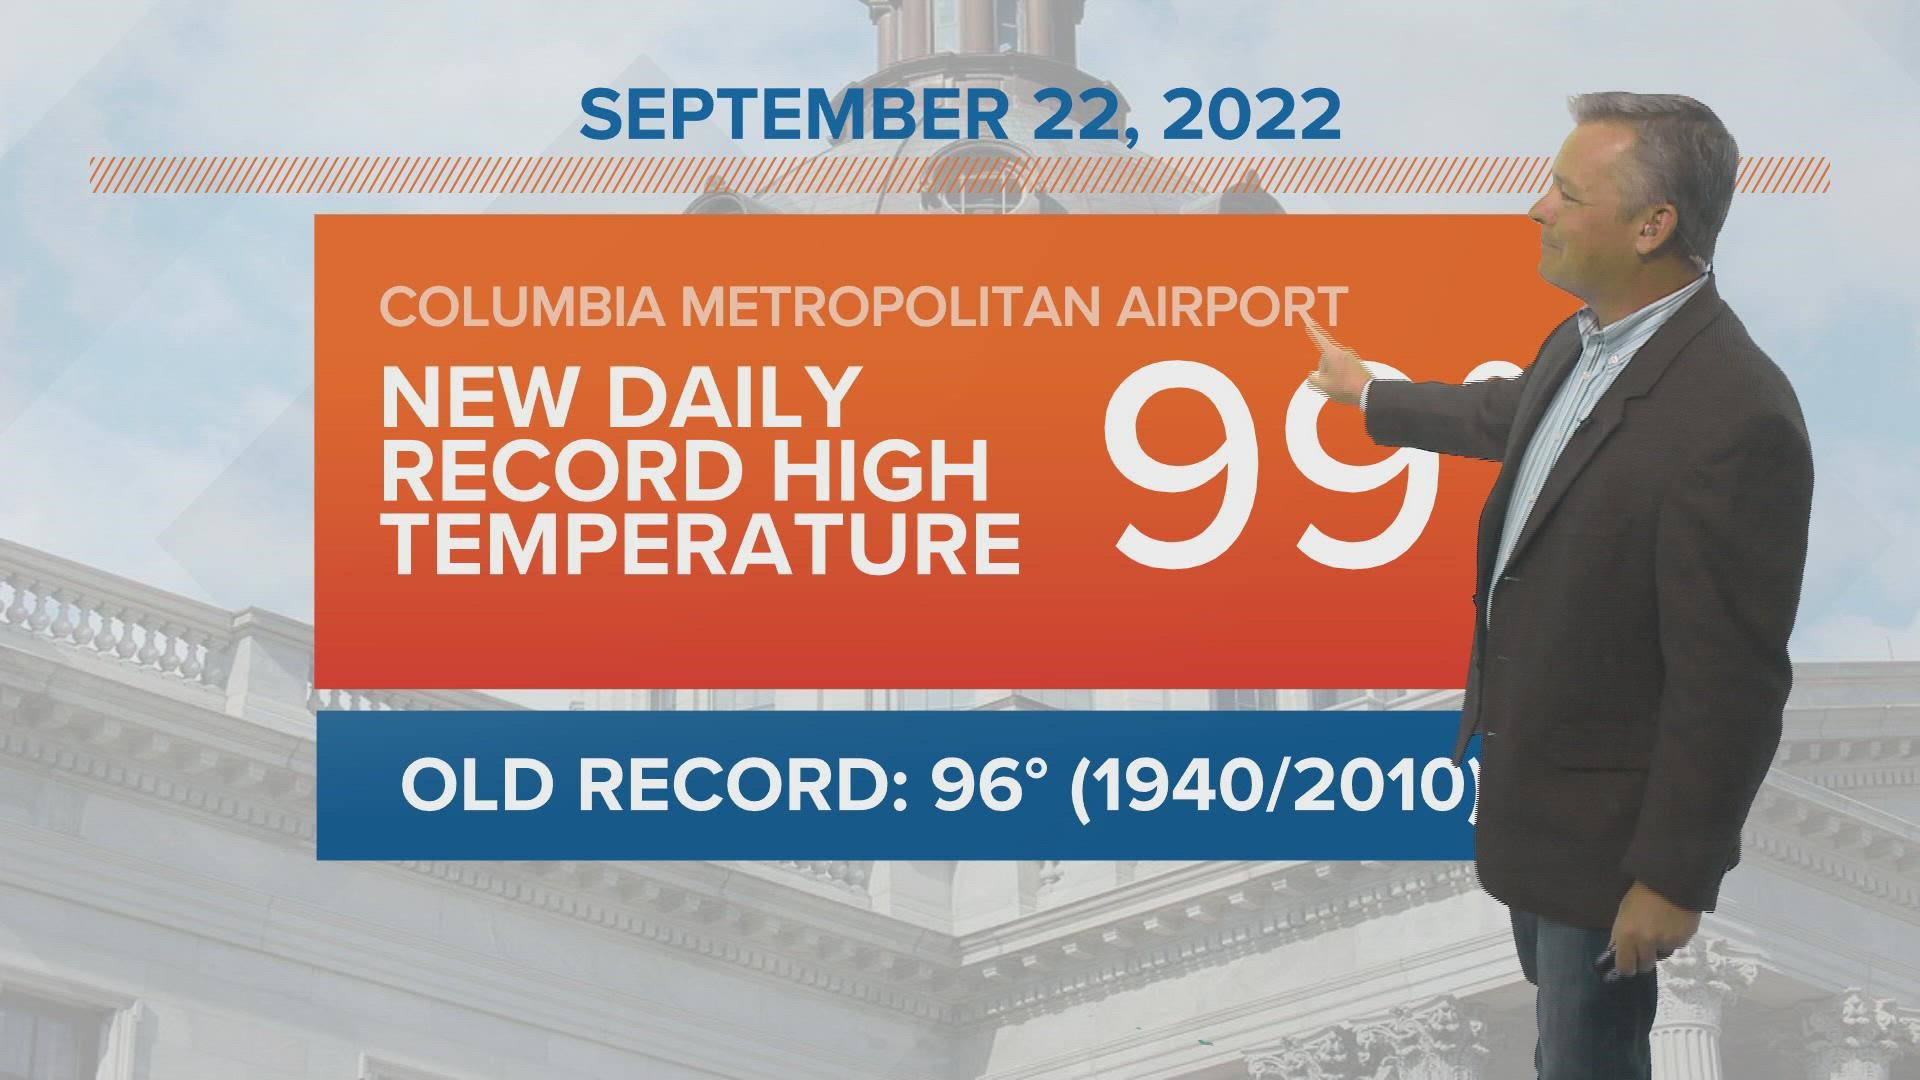 Thursday was very hot with high temperatures in the upper 90s. Columbia hit a record high of 99 degrees.